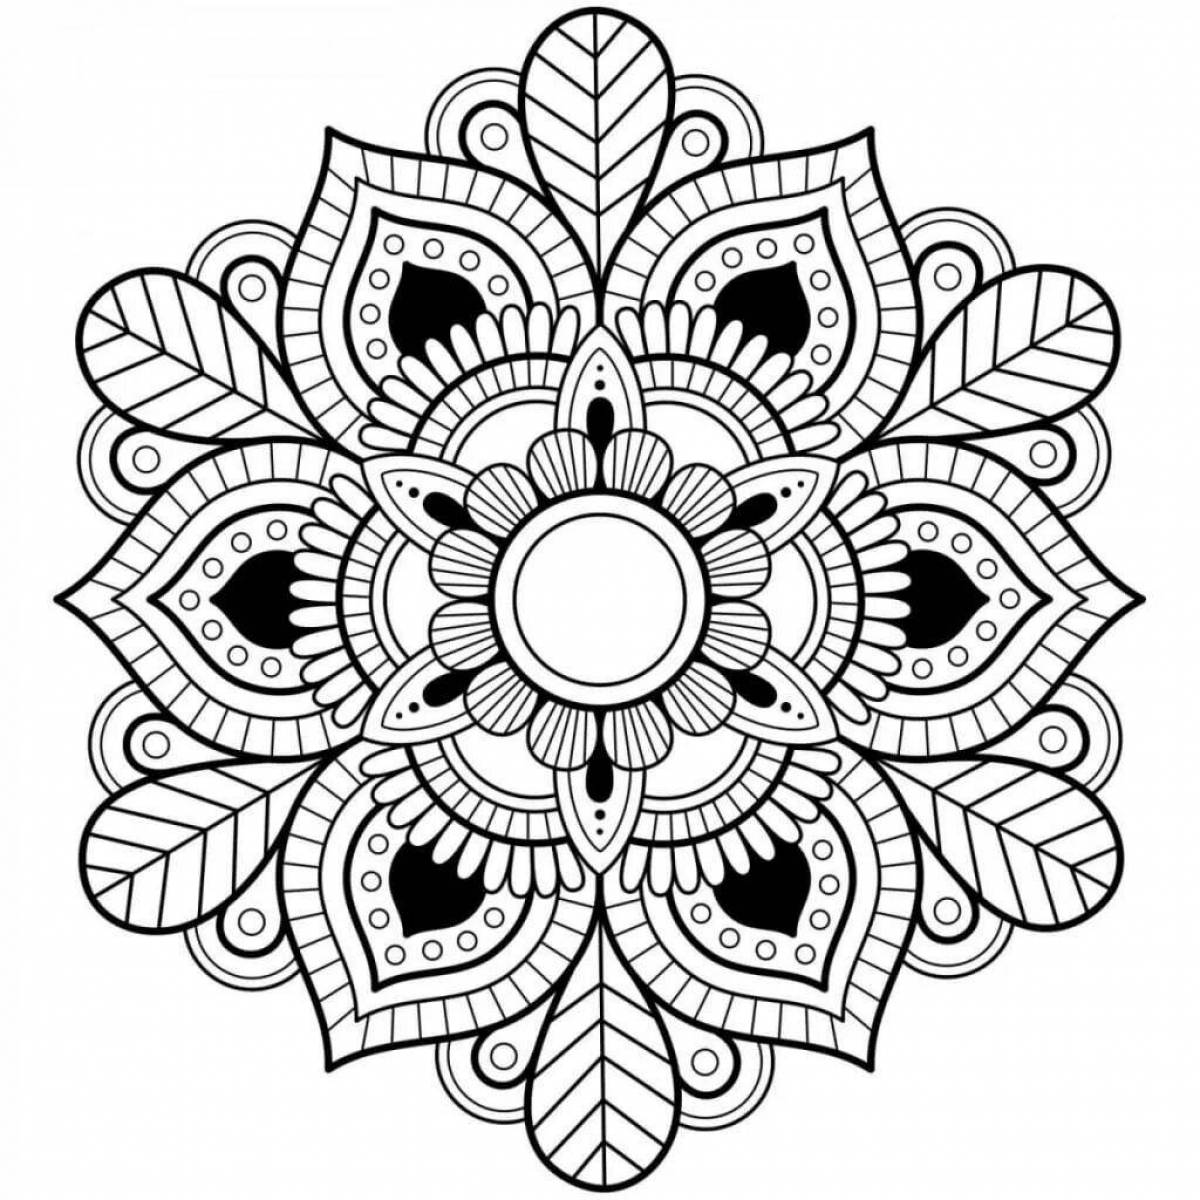 Intriguing patterns and ornaments for coloring